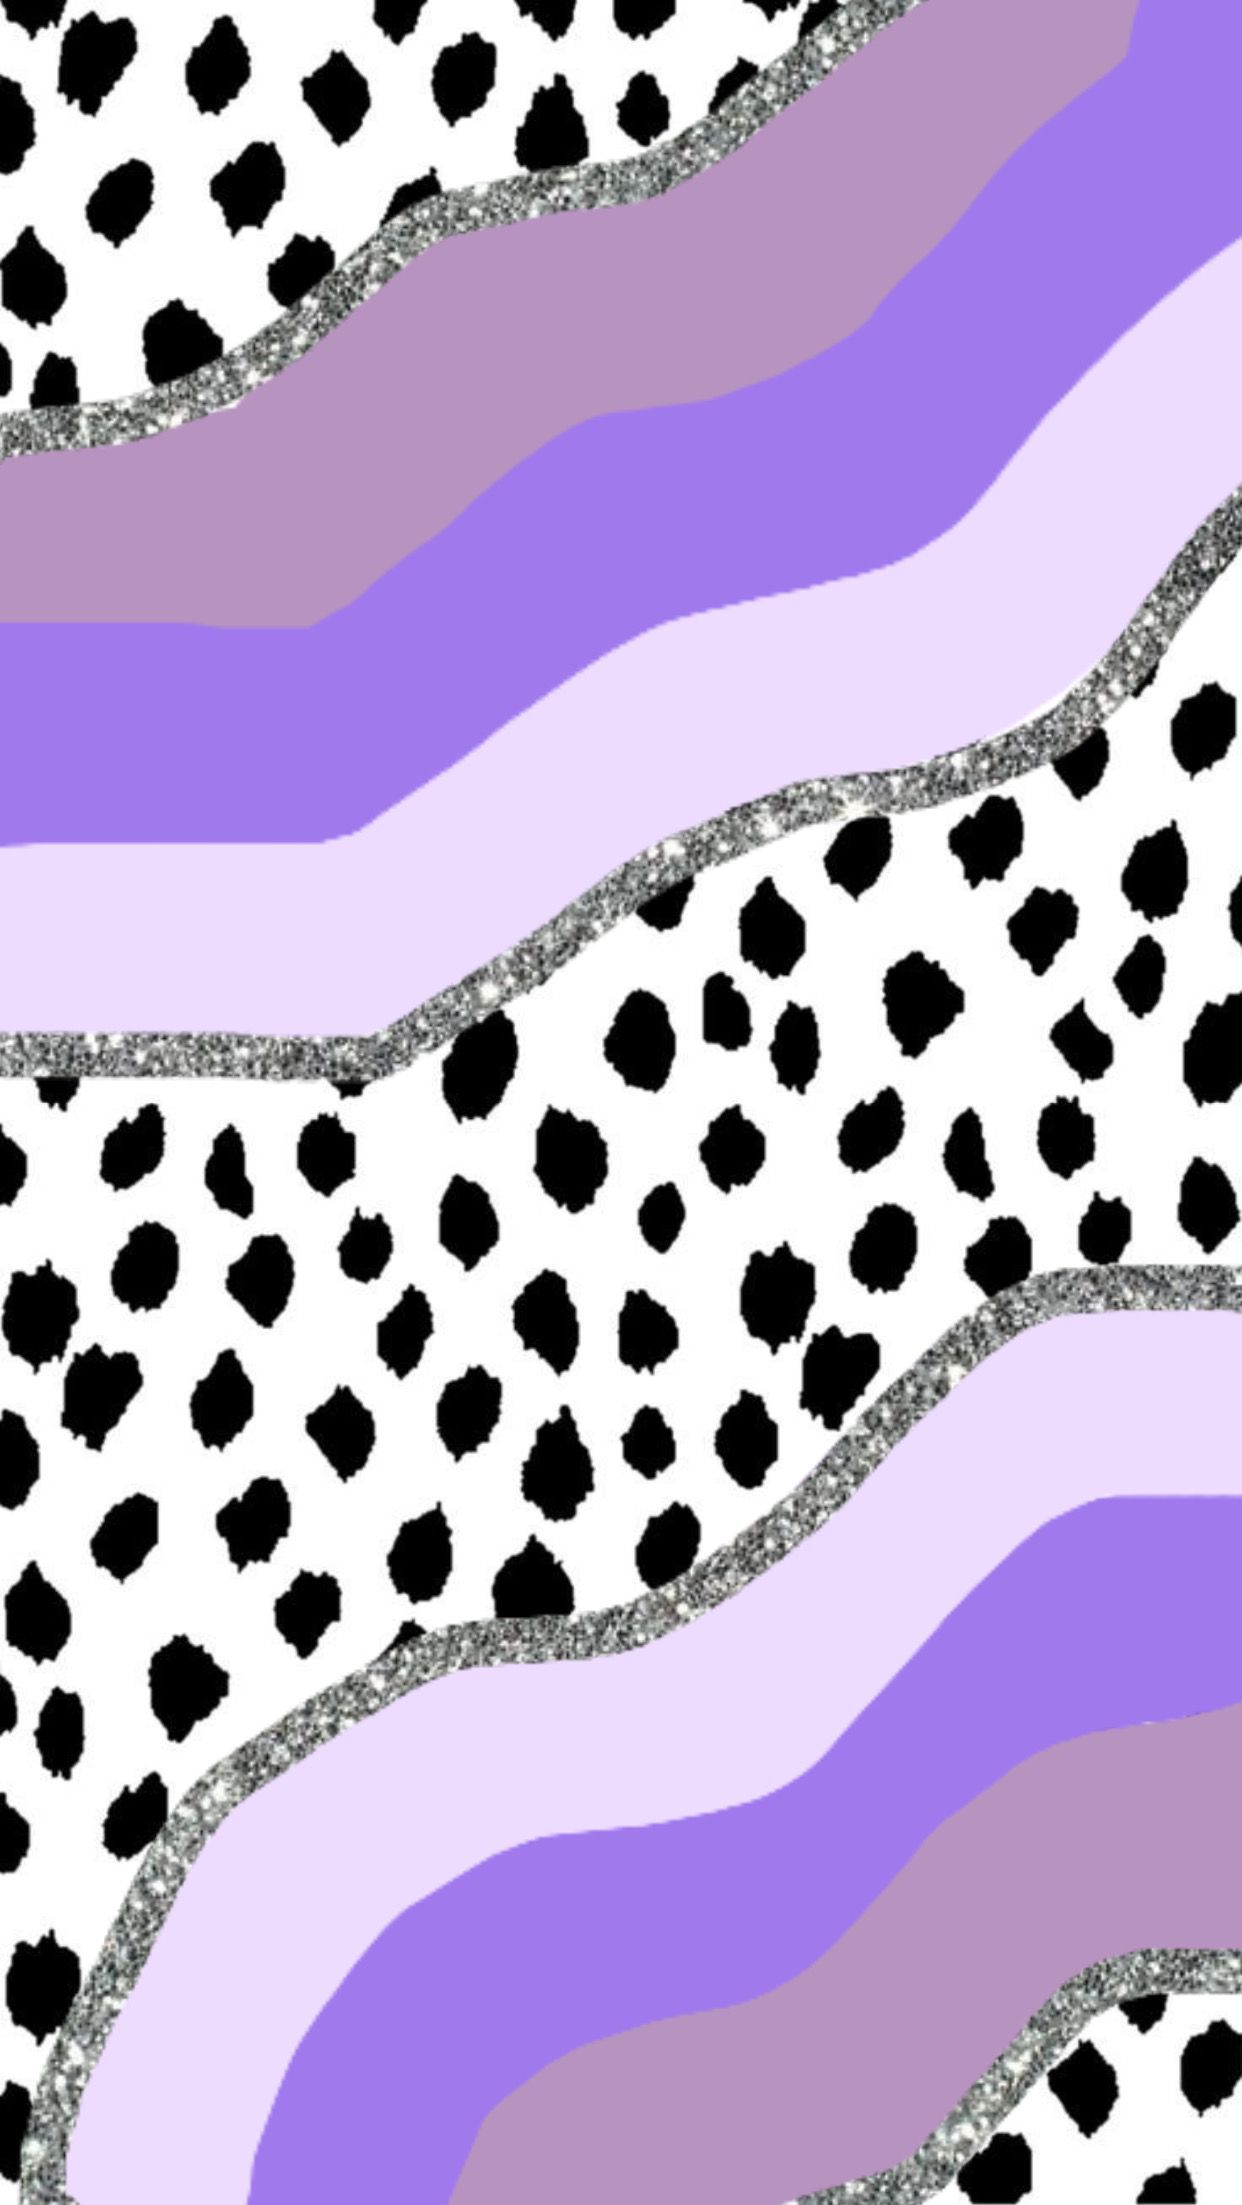 A purple and white pattern with black dots - Cow